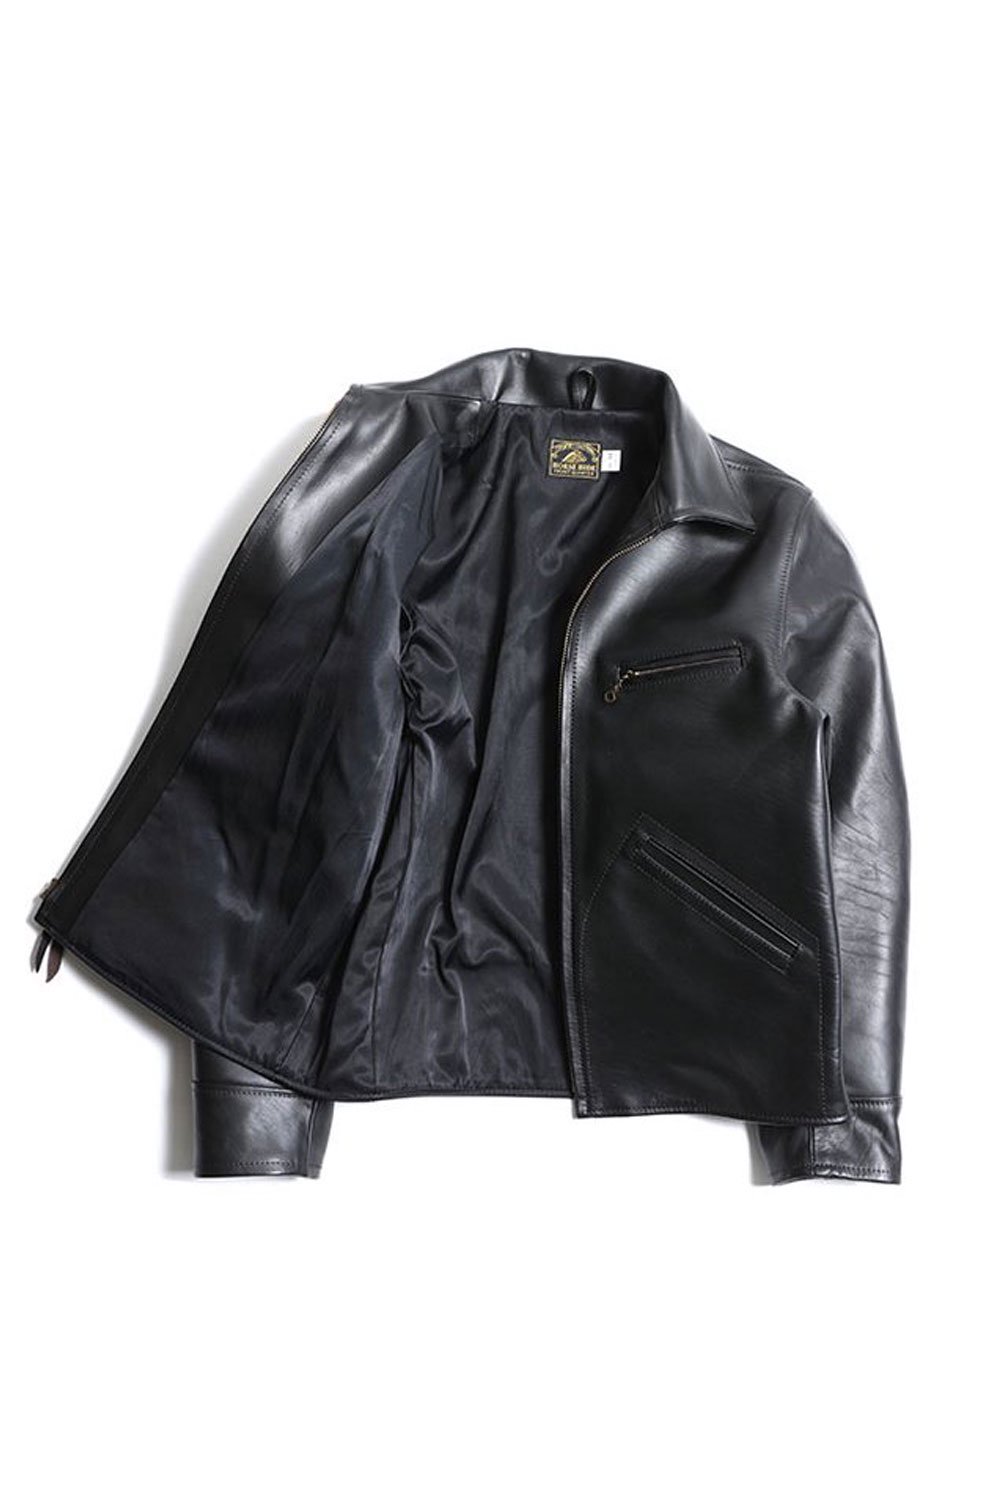 TROPHY CLOTHING(トロフィークロージング) レザージャケット HUMMING BIRD HORSEHIDE JACKET TR-YL08  通販正規取扱 | ハーレムストア公式通販サイト